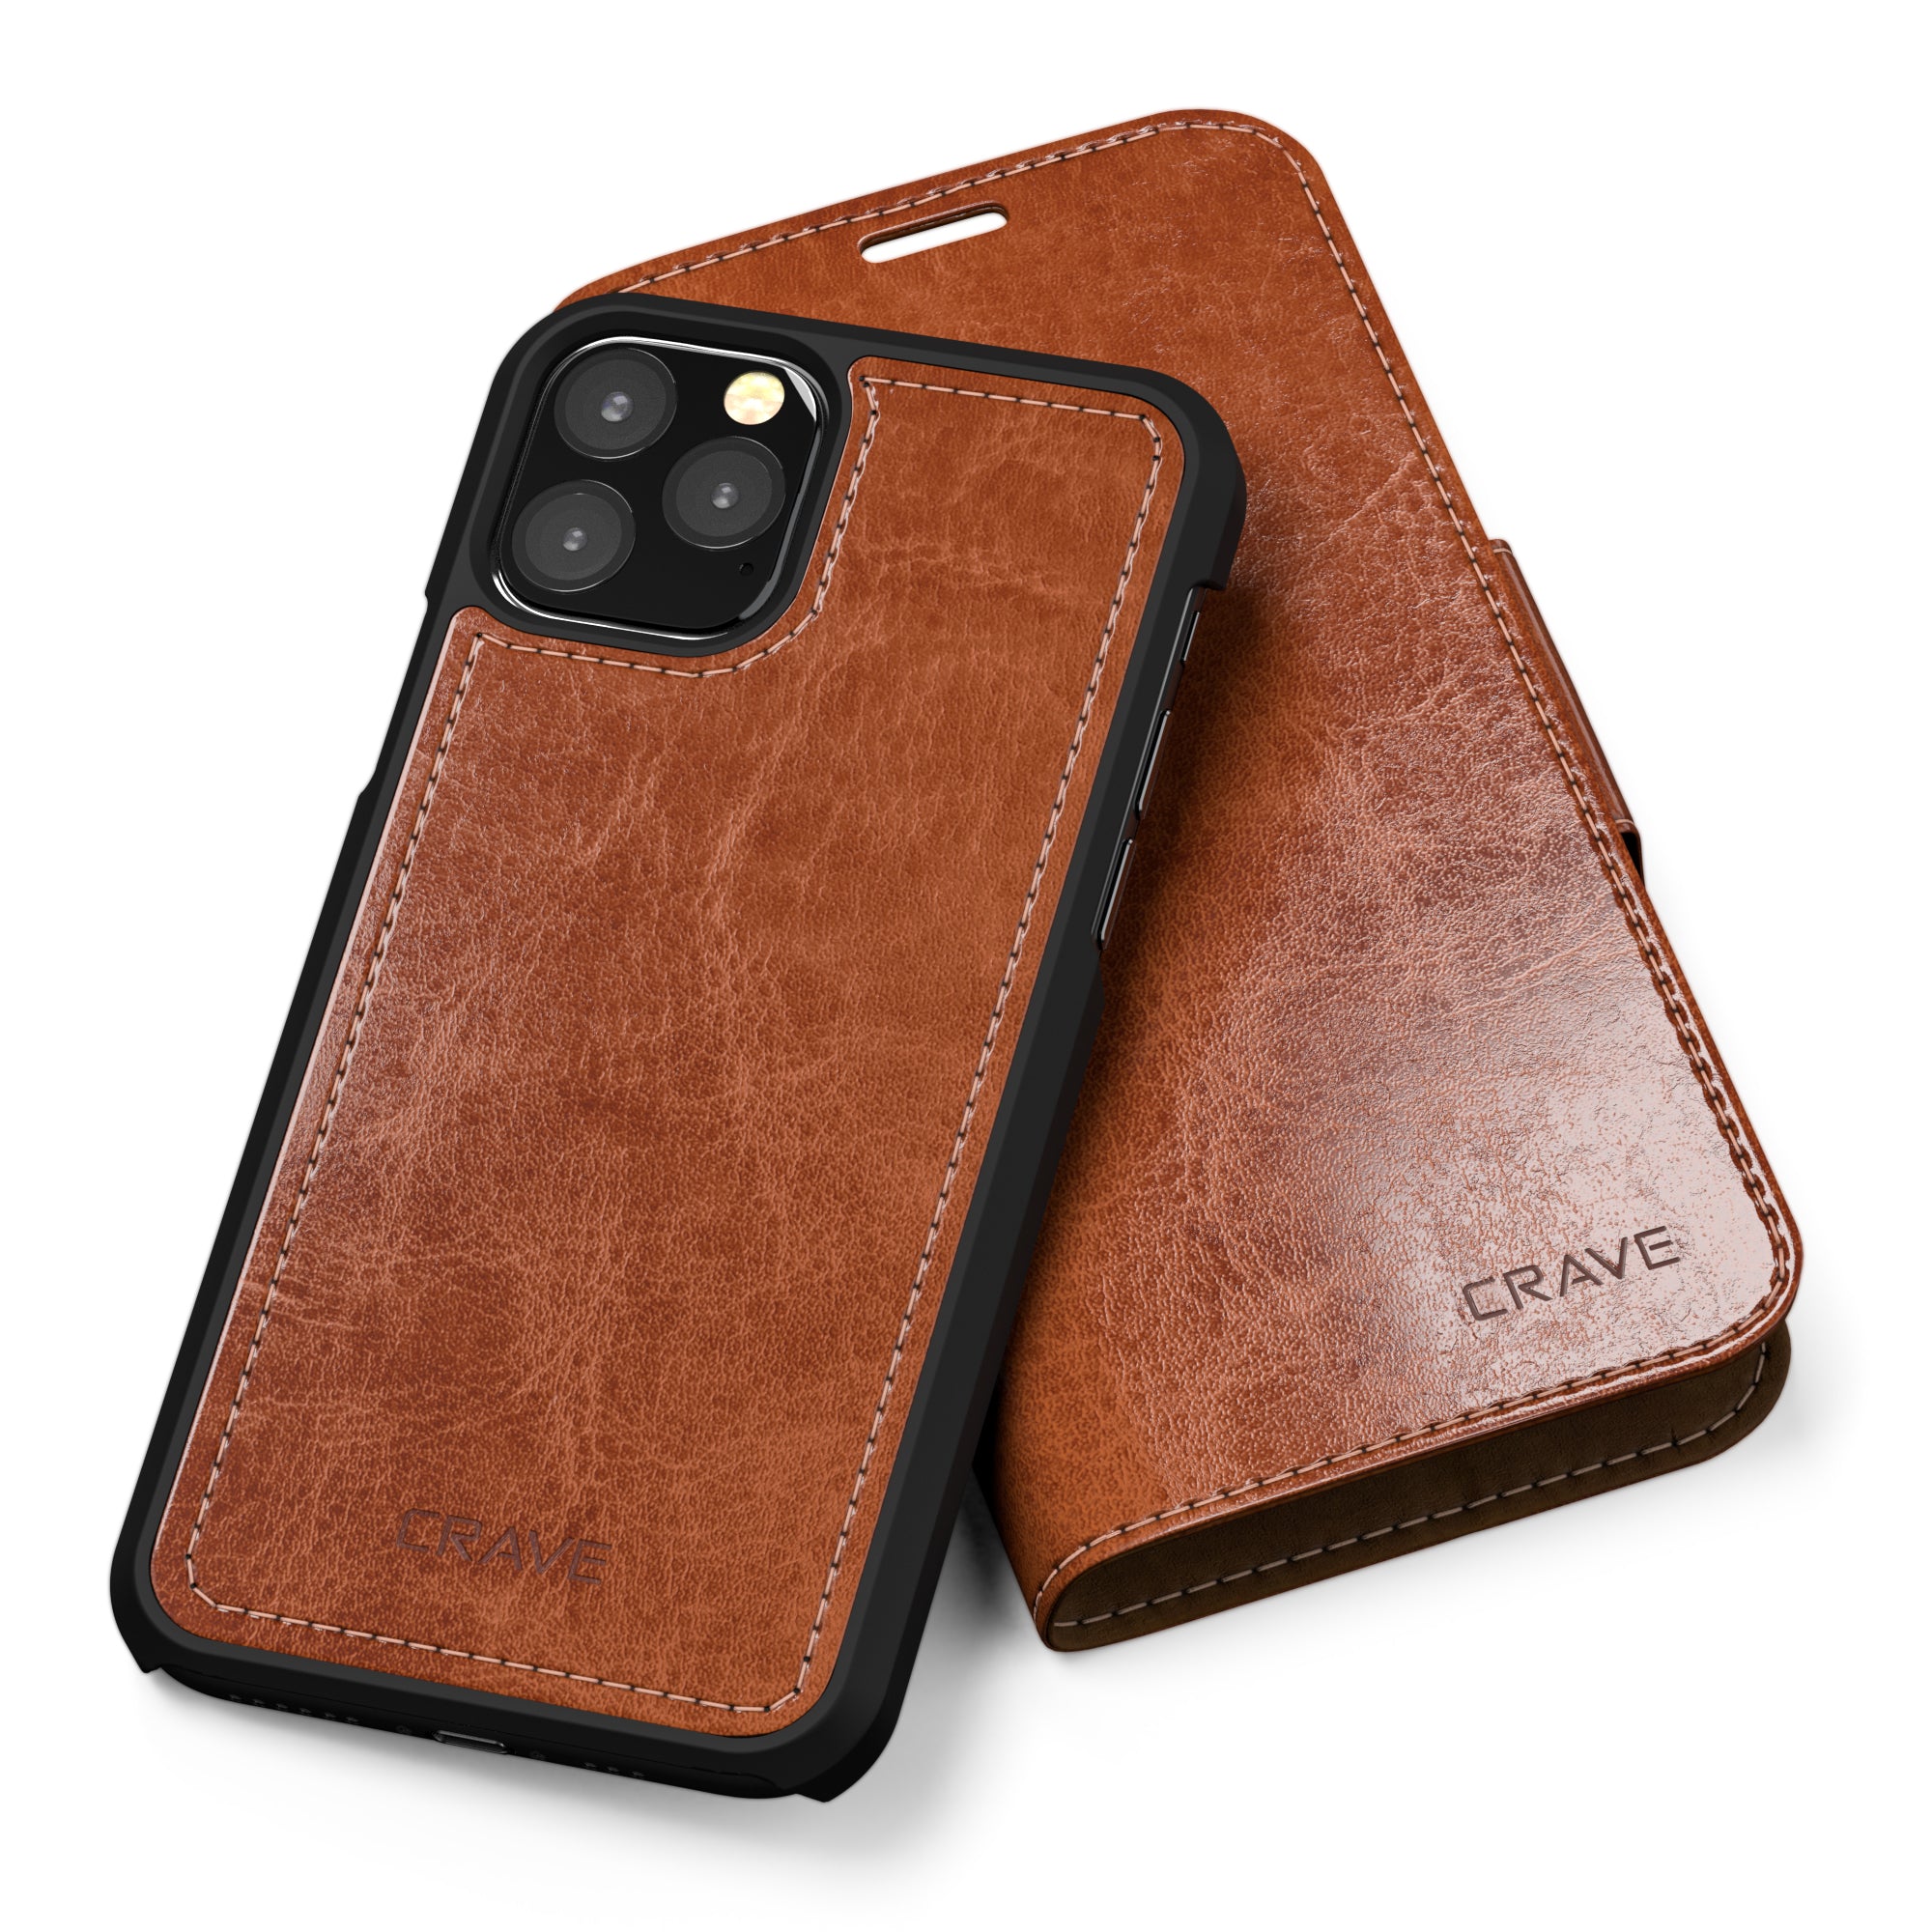 iPhone 11 Pro Case Vegan Leather Wallet, Leather Guard